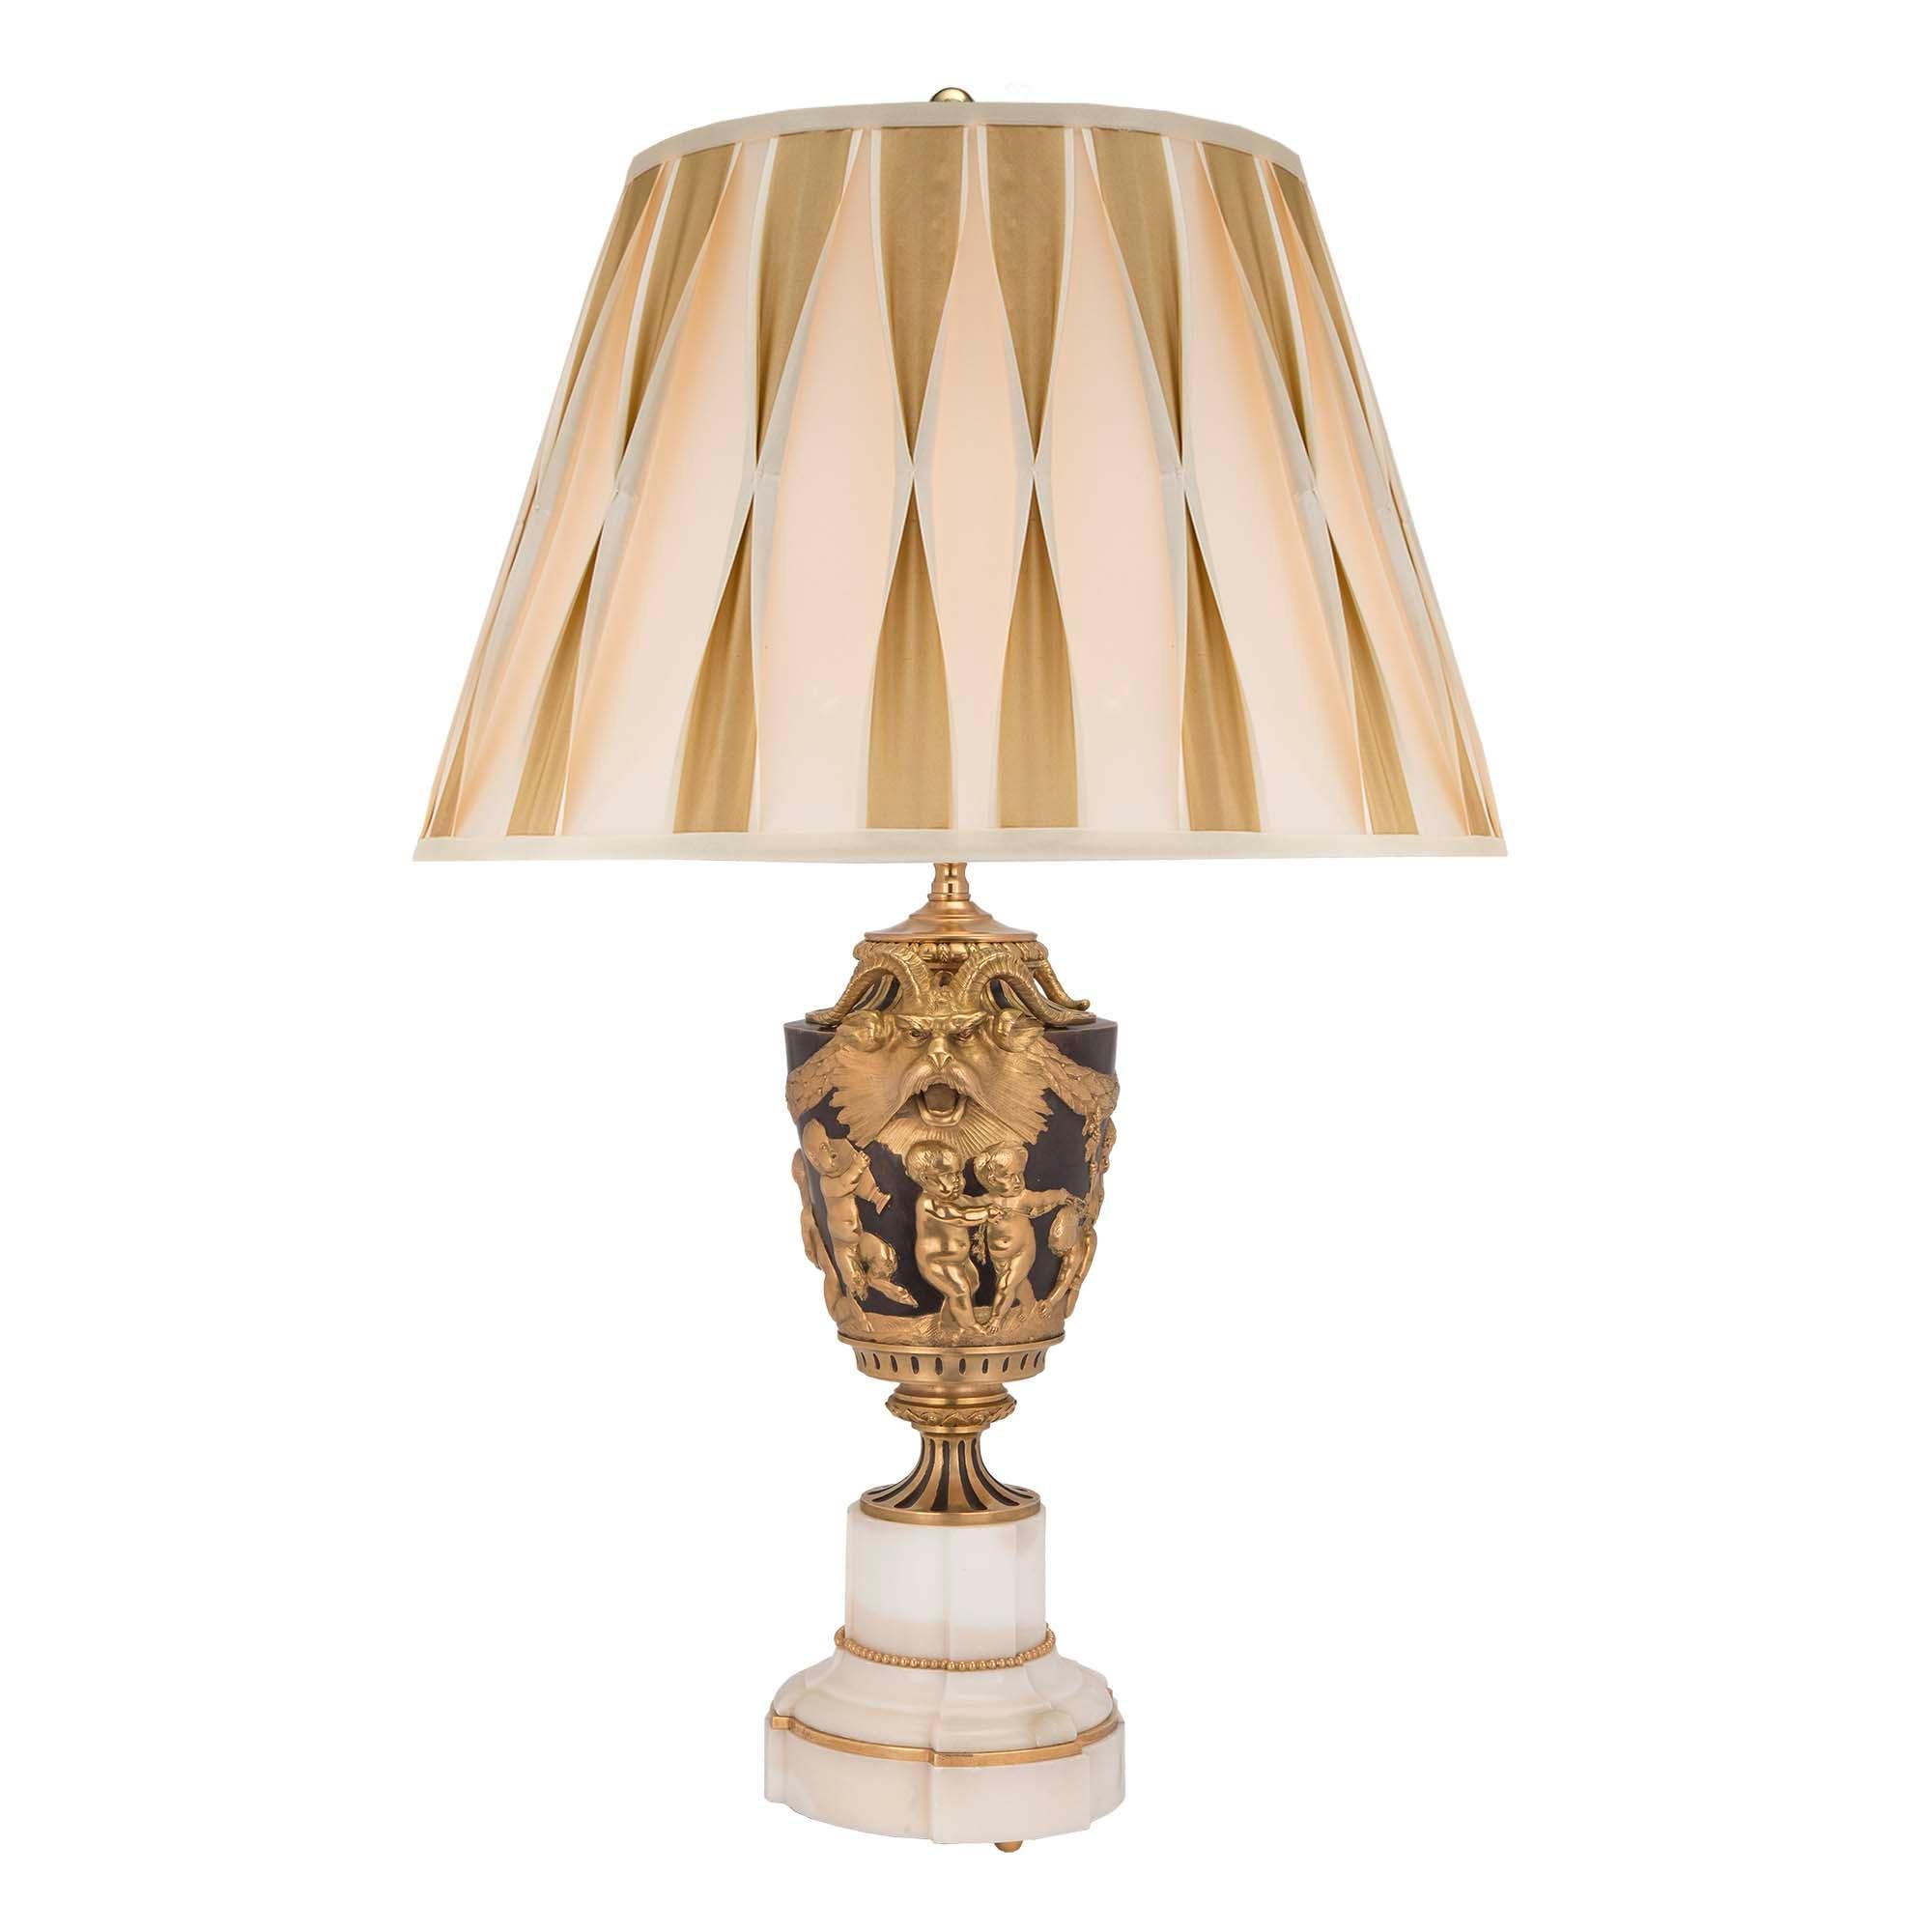 A most elegant pair of French 19th century Louis XVI st. patinated bronze and ormolu lamps after a model by John Flaxman. Each lamp is raised by ormolu ball feet and a solid white Carrara marble base, with cut sides, a mottled design and decorative